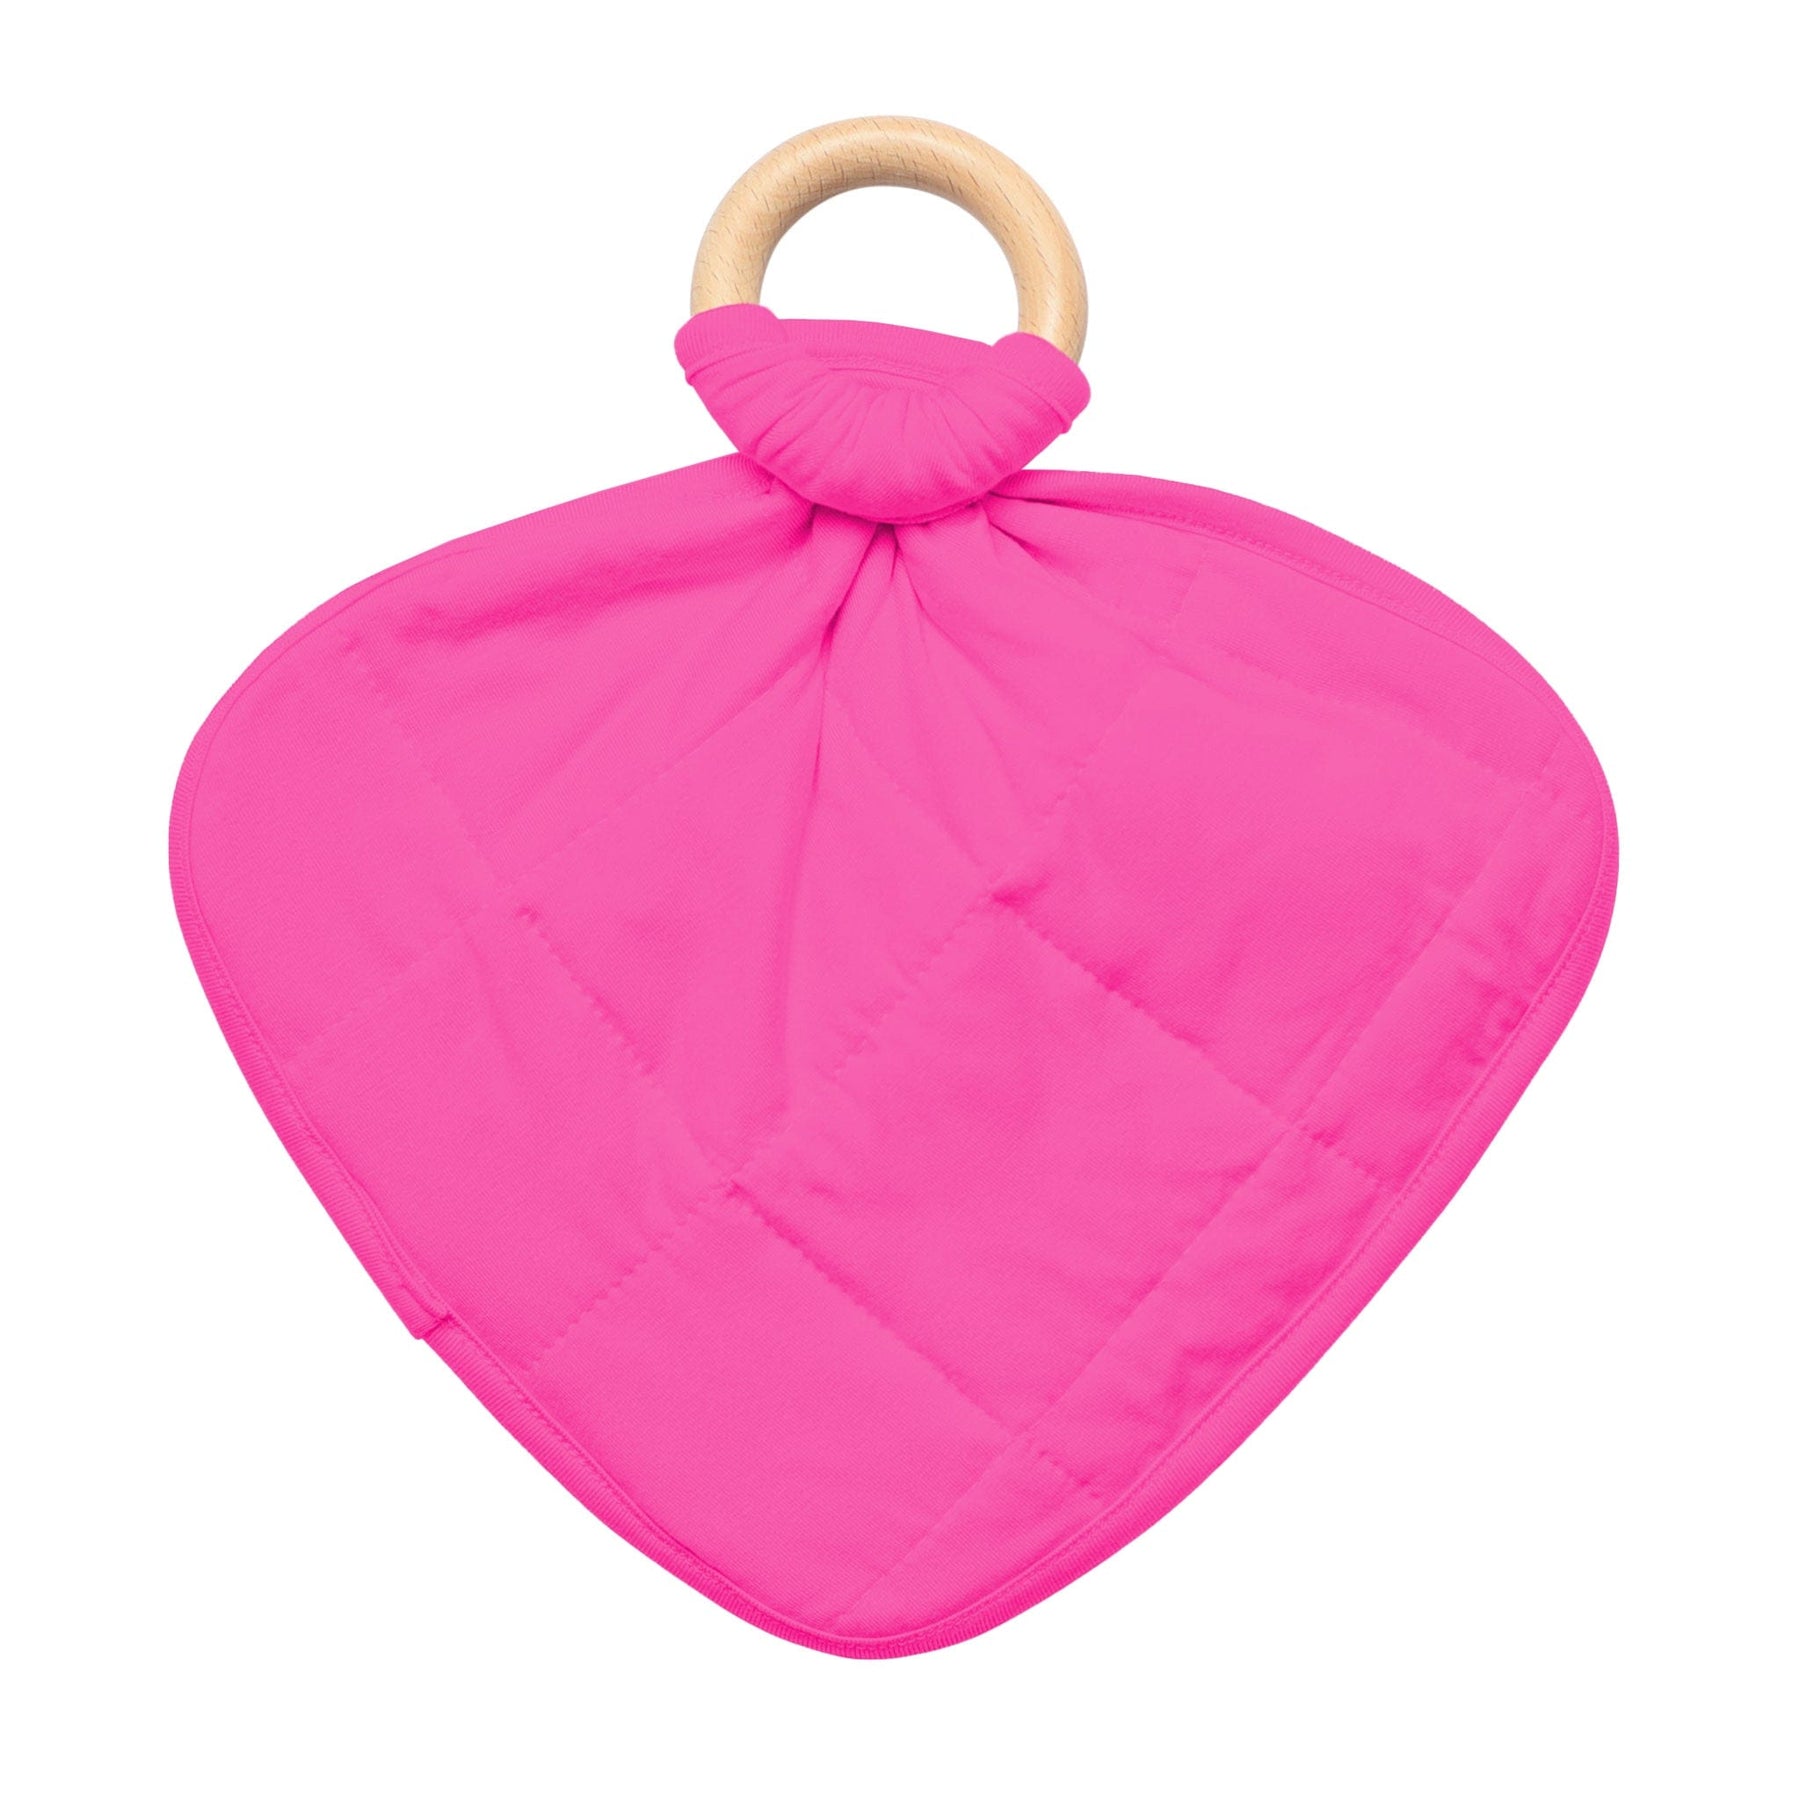 Kyte Baby Lovey Raspberry / Infant Lovey in Raspberry with Removable Teething Ring